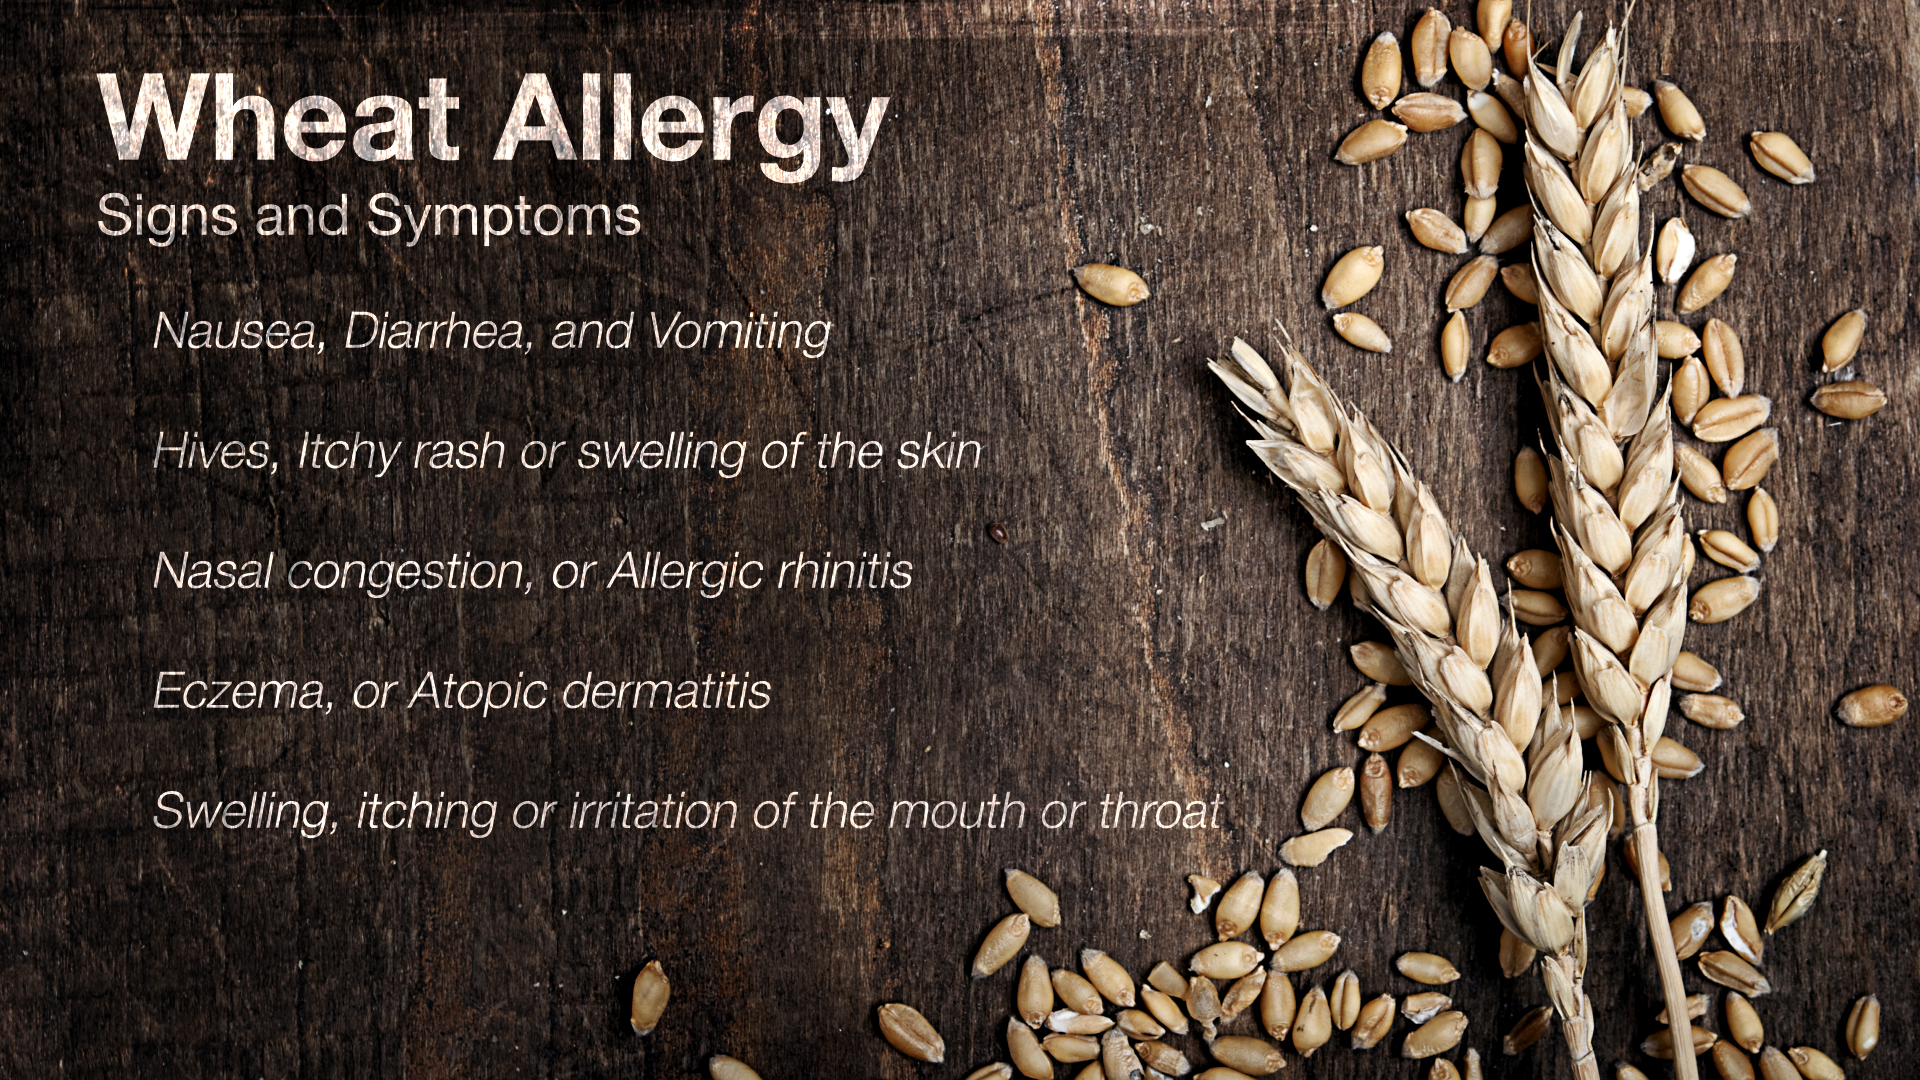 Wheat Allergy Shown And Explained Using Medical Animation Still Shot